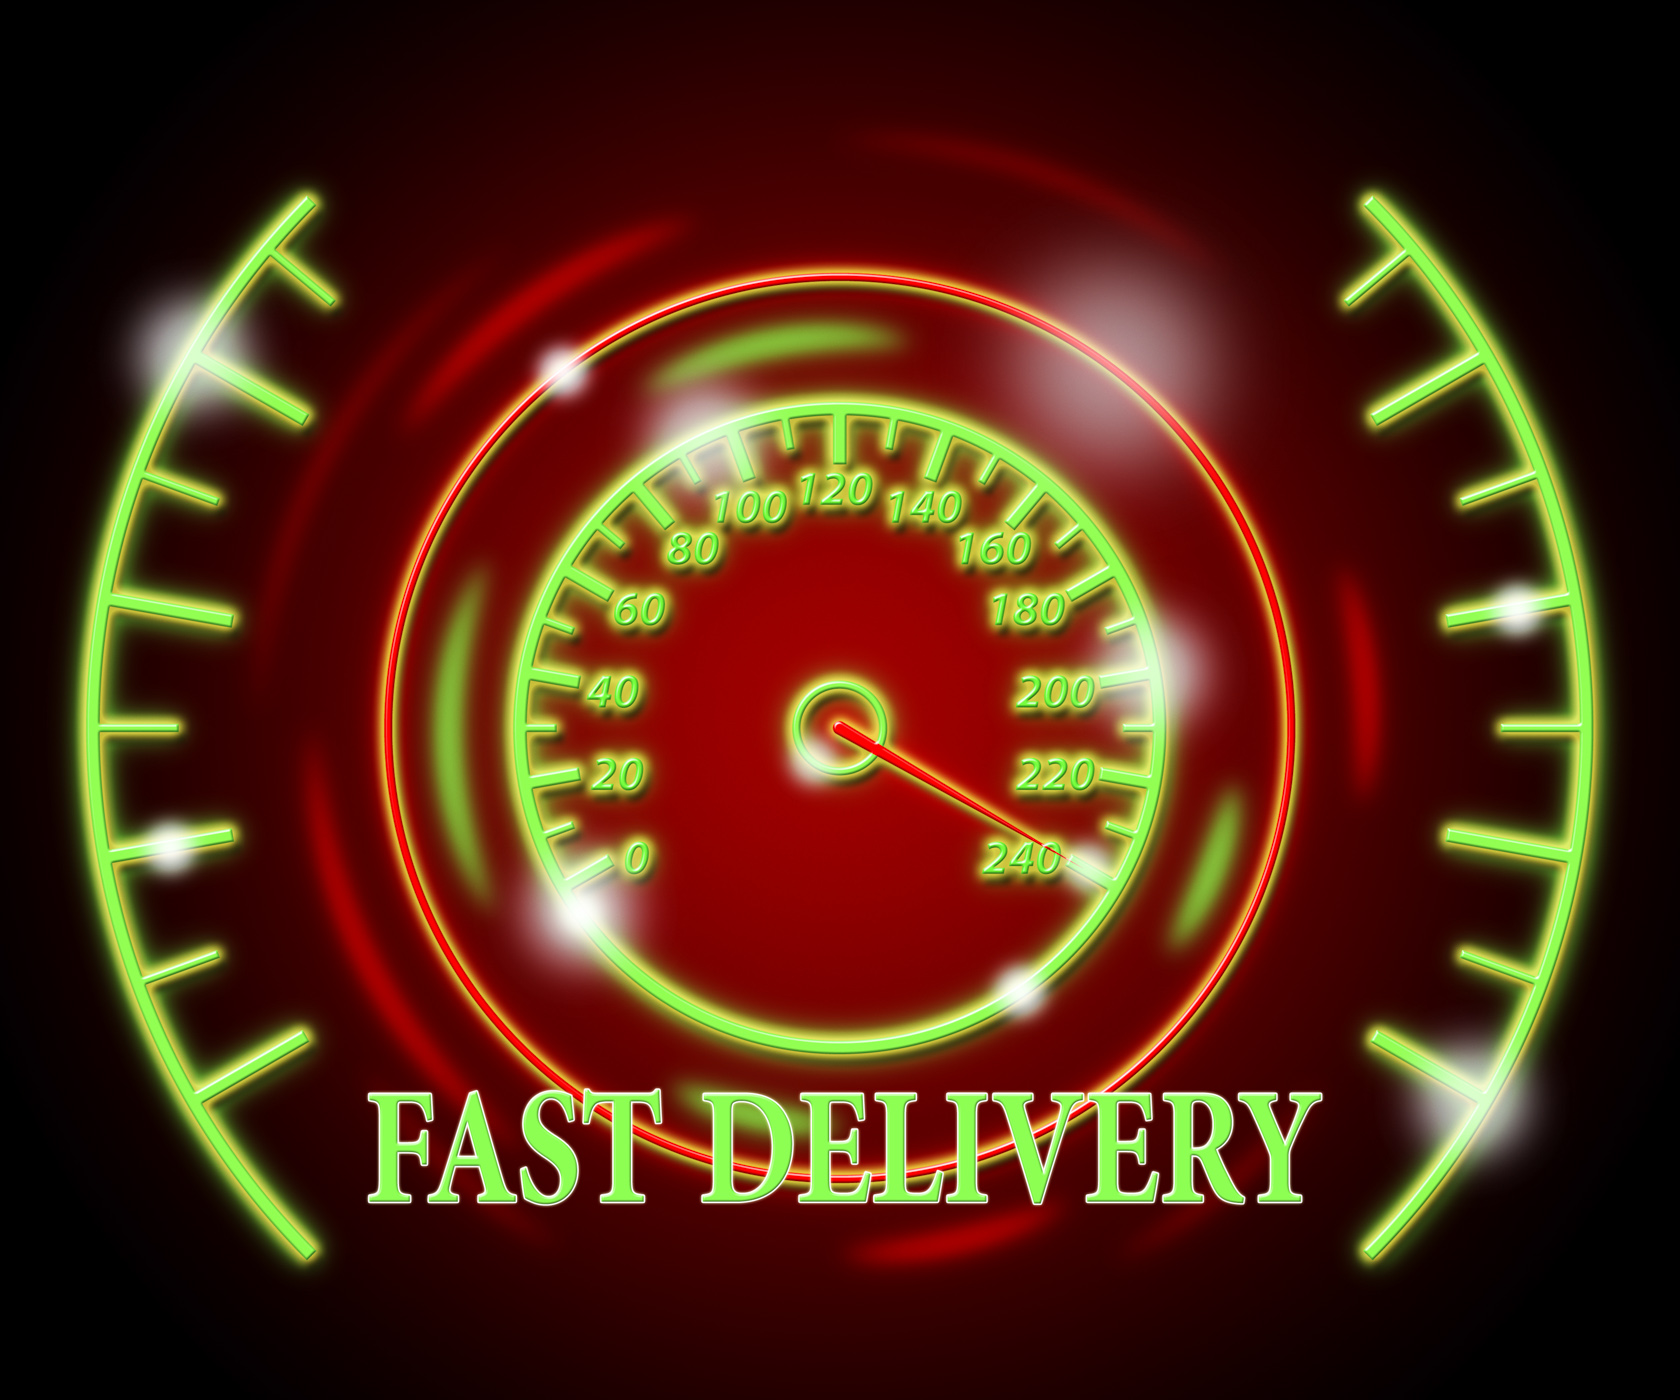 Fast delivery represents high speed and action photo